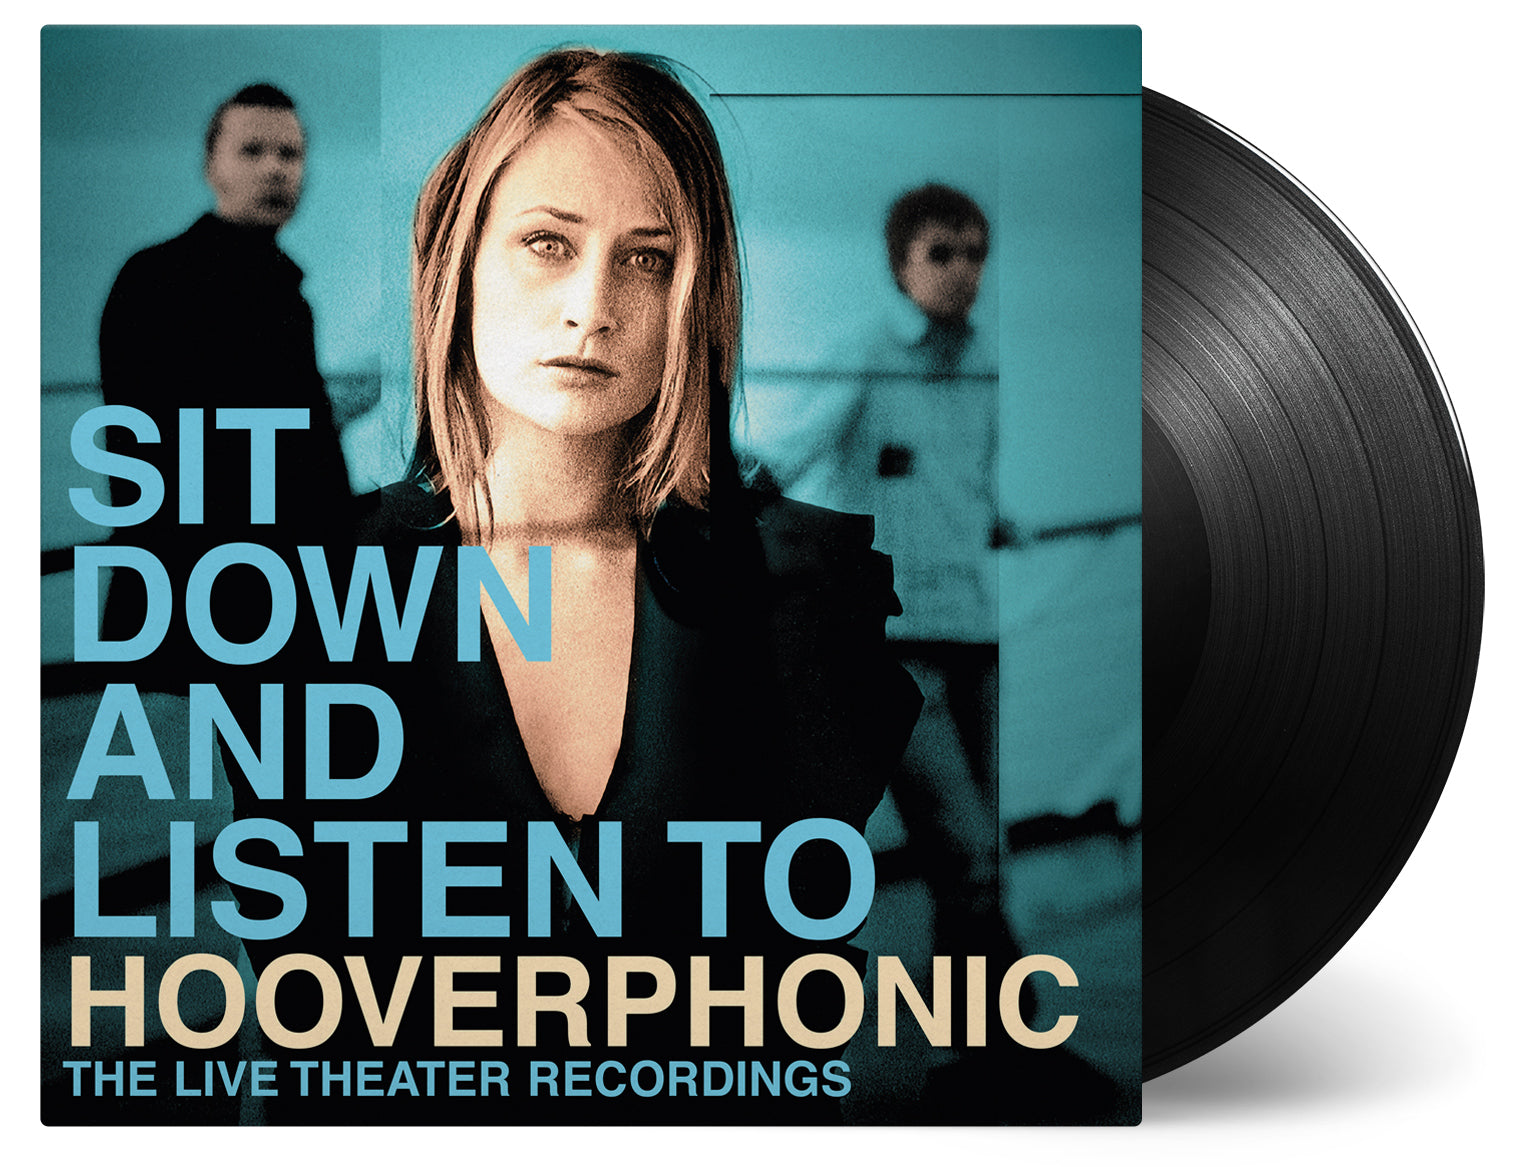 HOOVERPHONIC - SIT DOWN AND LISTEN TO